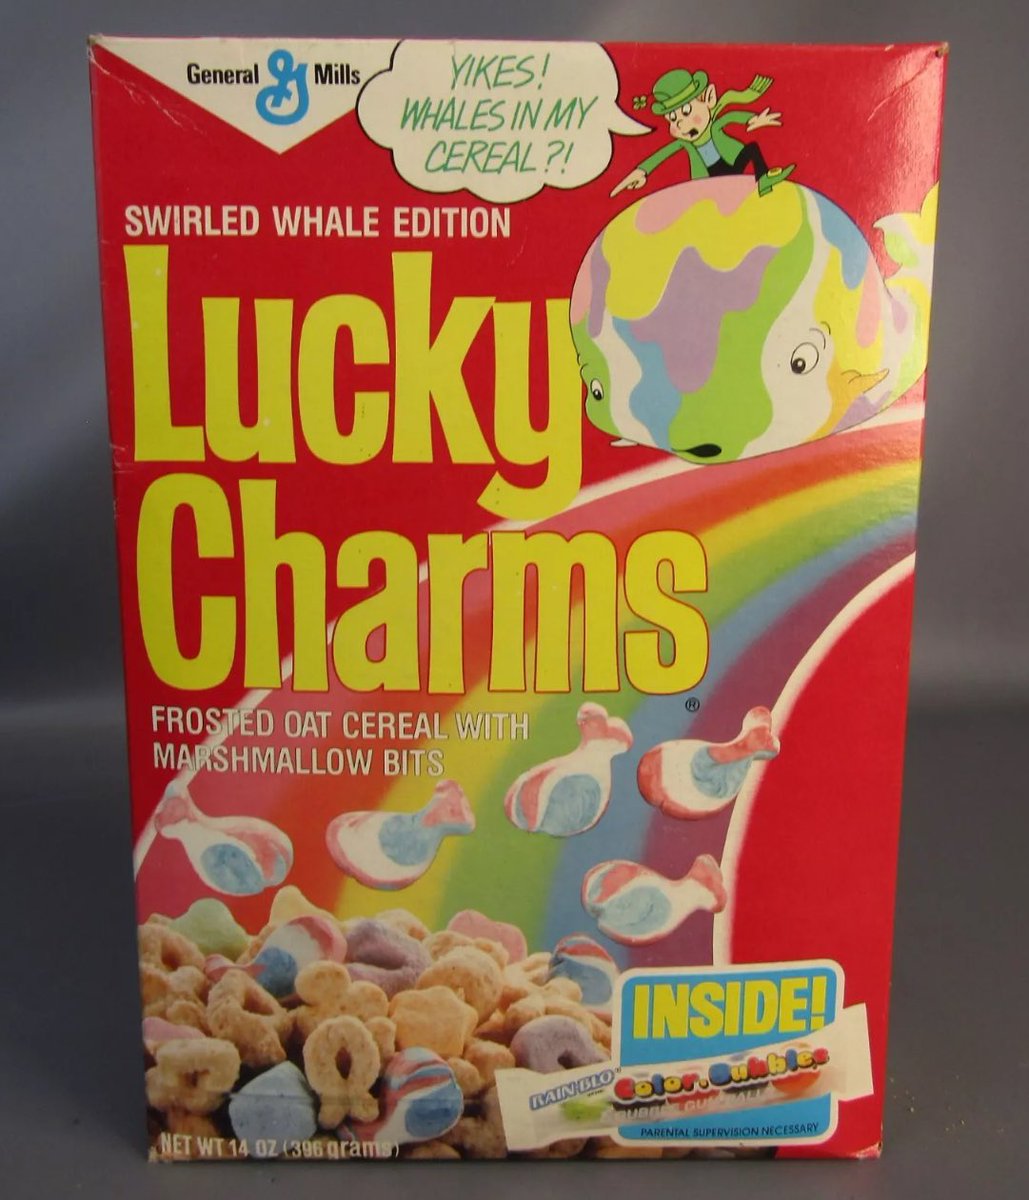 This is an extremely rare 1986 box of “Whale Lucky Charms” with a free pack of Rain-Blo Color Bubbles gum included! This is almost too much for me to handle.